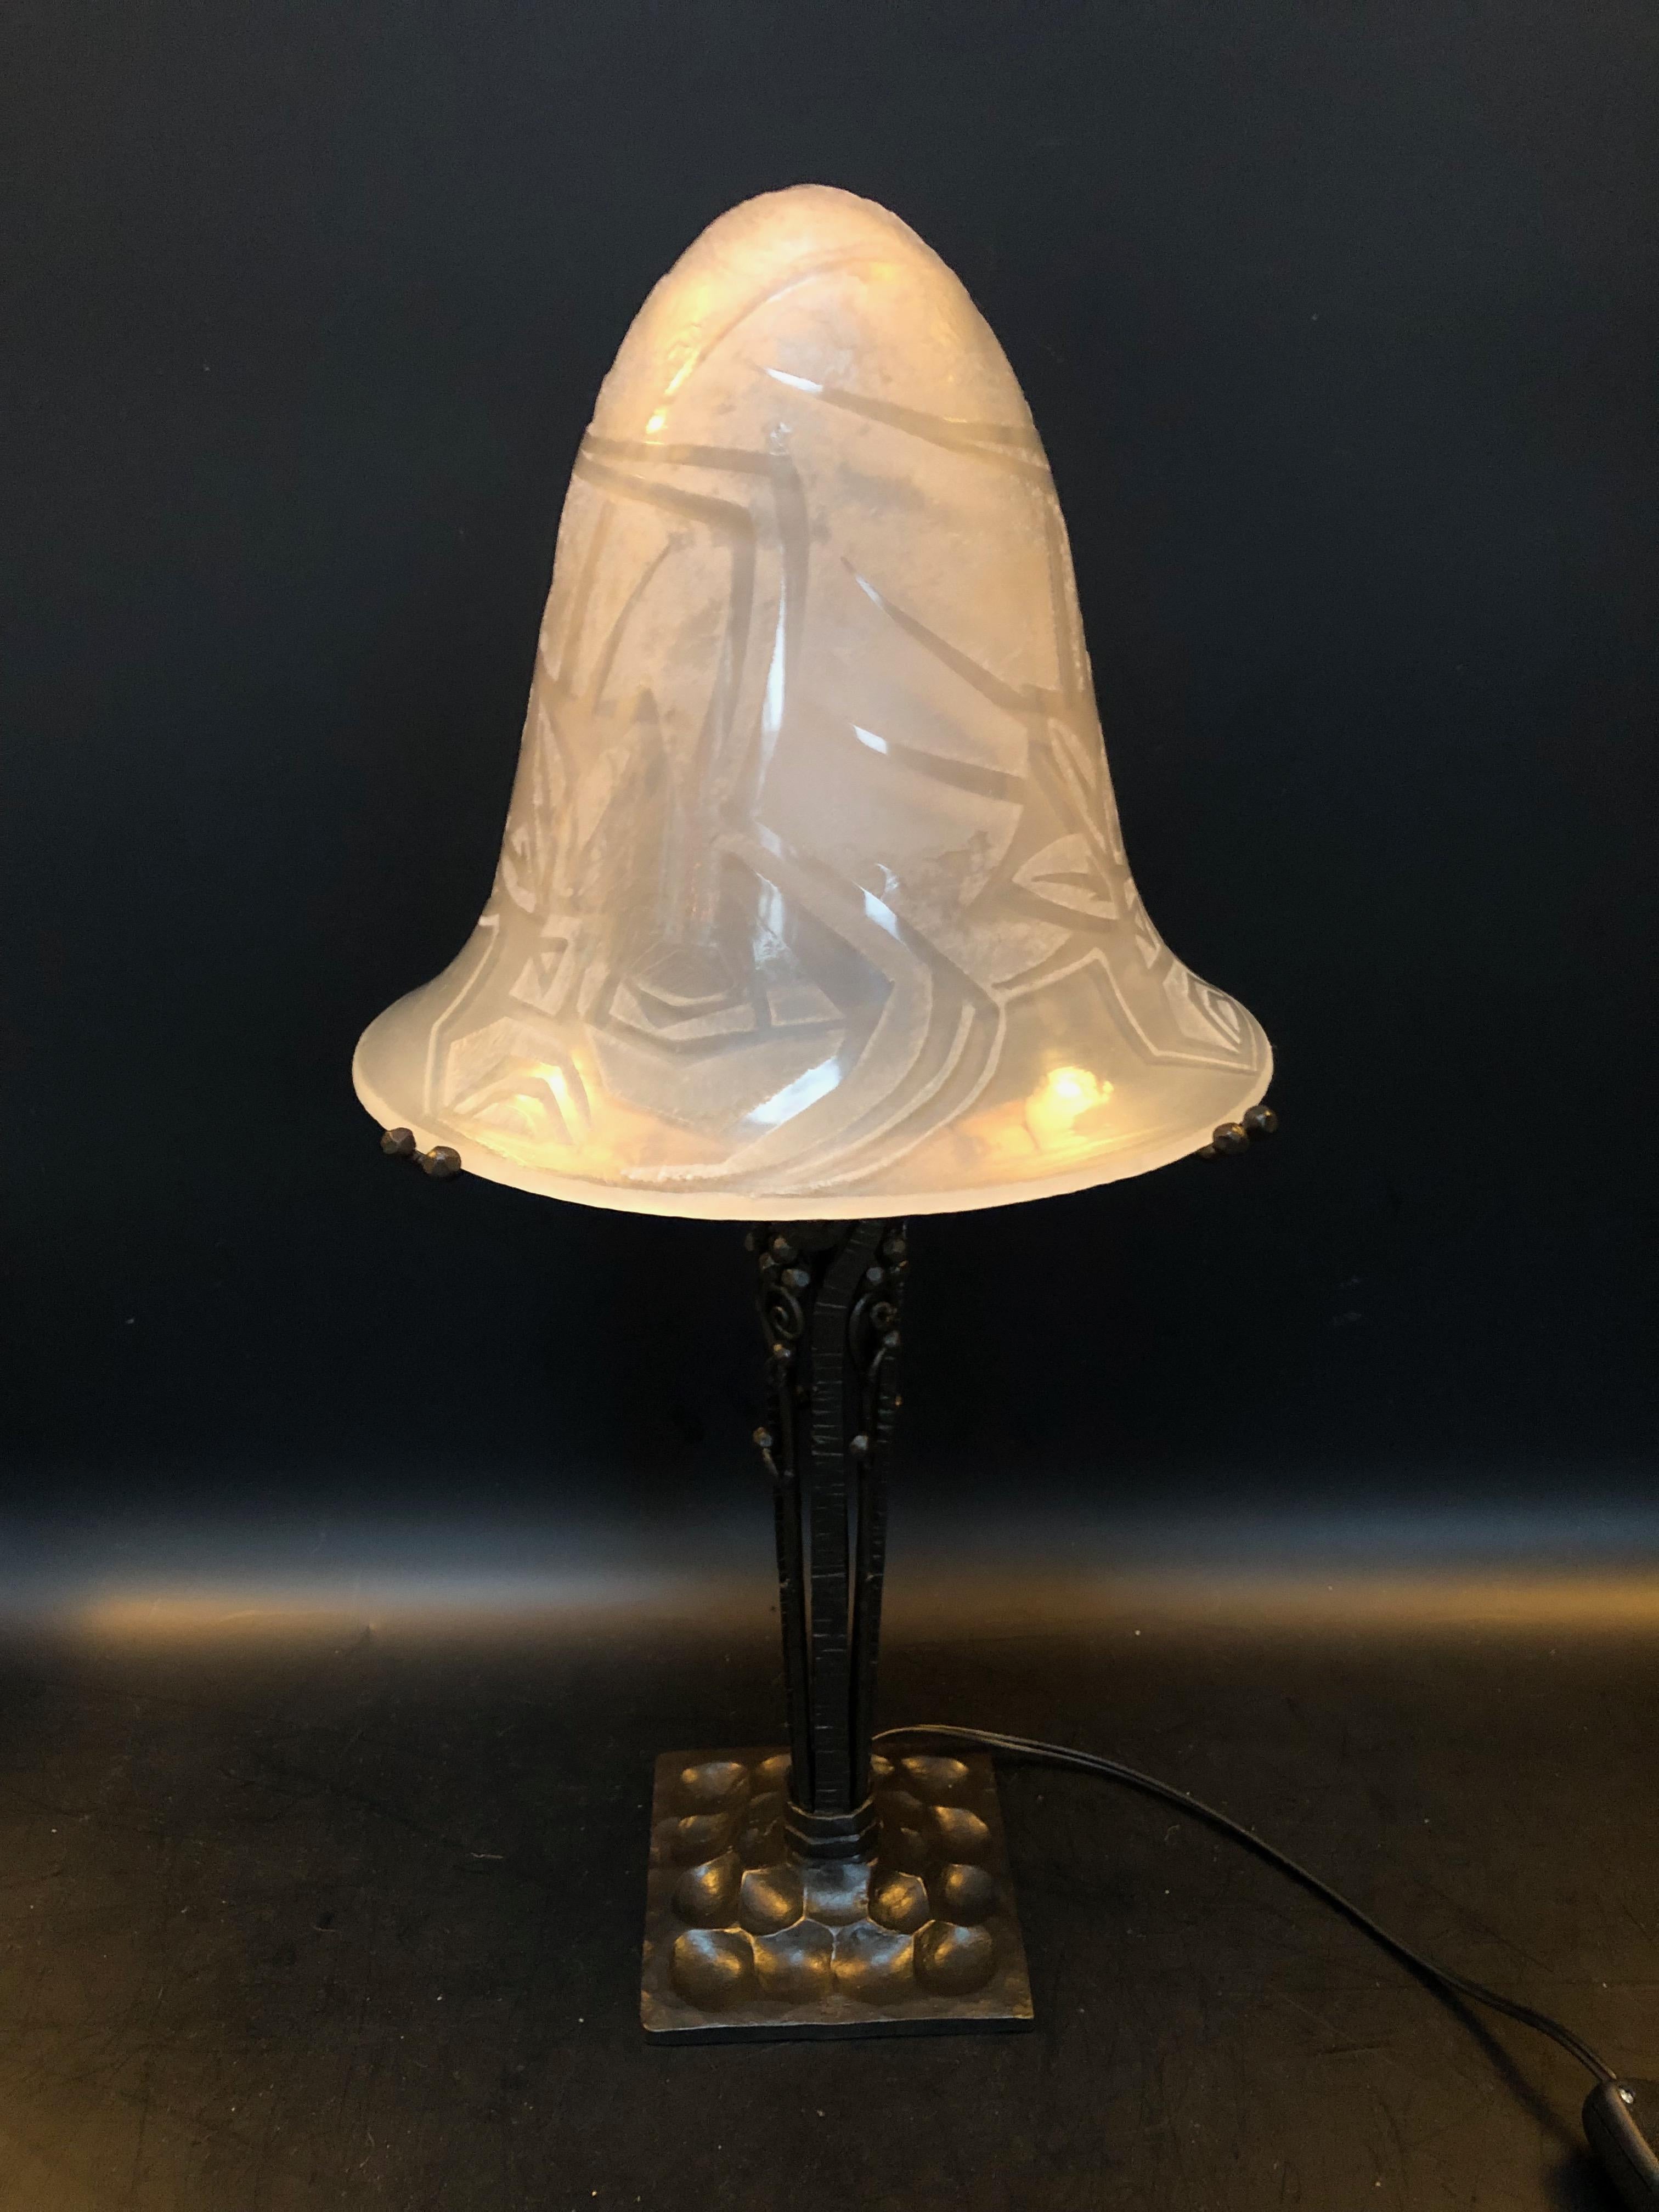 Art deco lamp circa 1925.
Wrought iron foot, stamped P. Kiss.
Acid-etched white glass shell, signed Noverdy.
In perfect condition and electrified.

Total height: 44 cm
Base: 10.5cm x 10.5cm
Shell diameter: 21 cm

Paul Kiss, born March 5, 1886 in